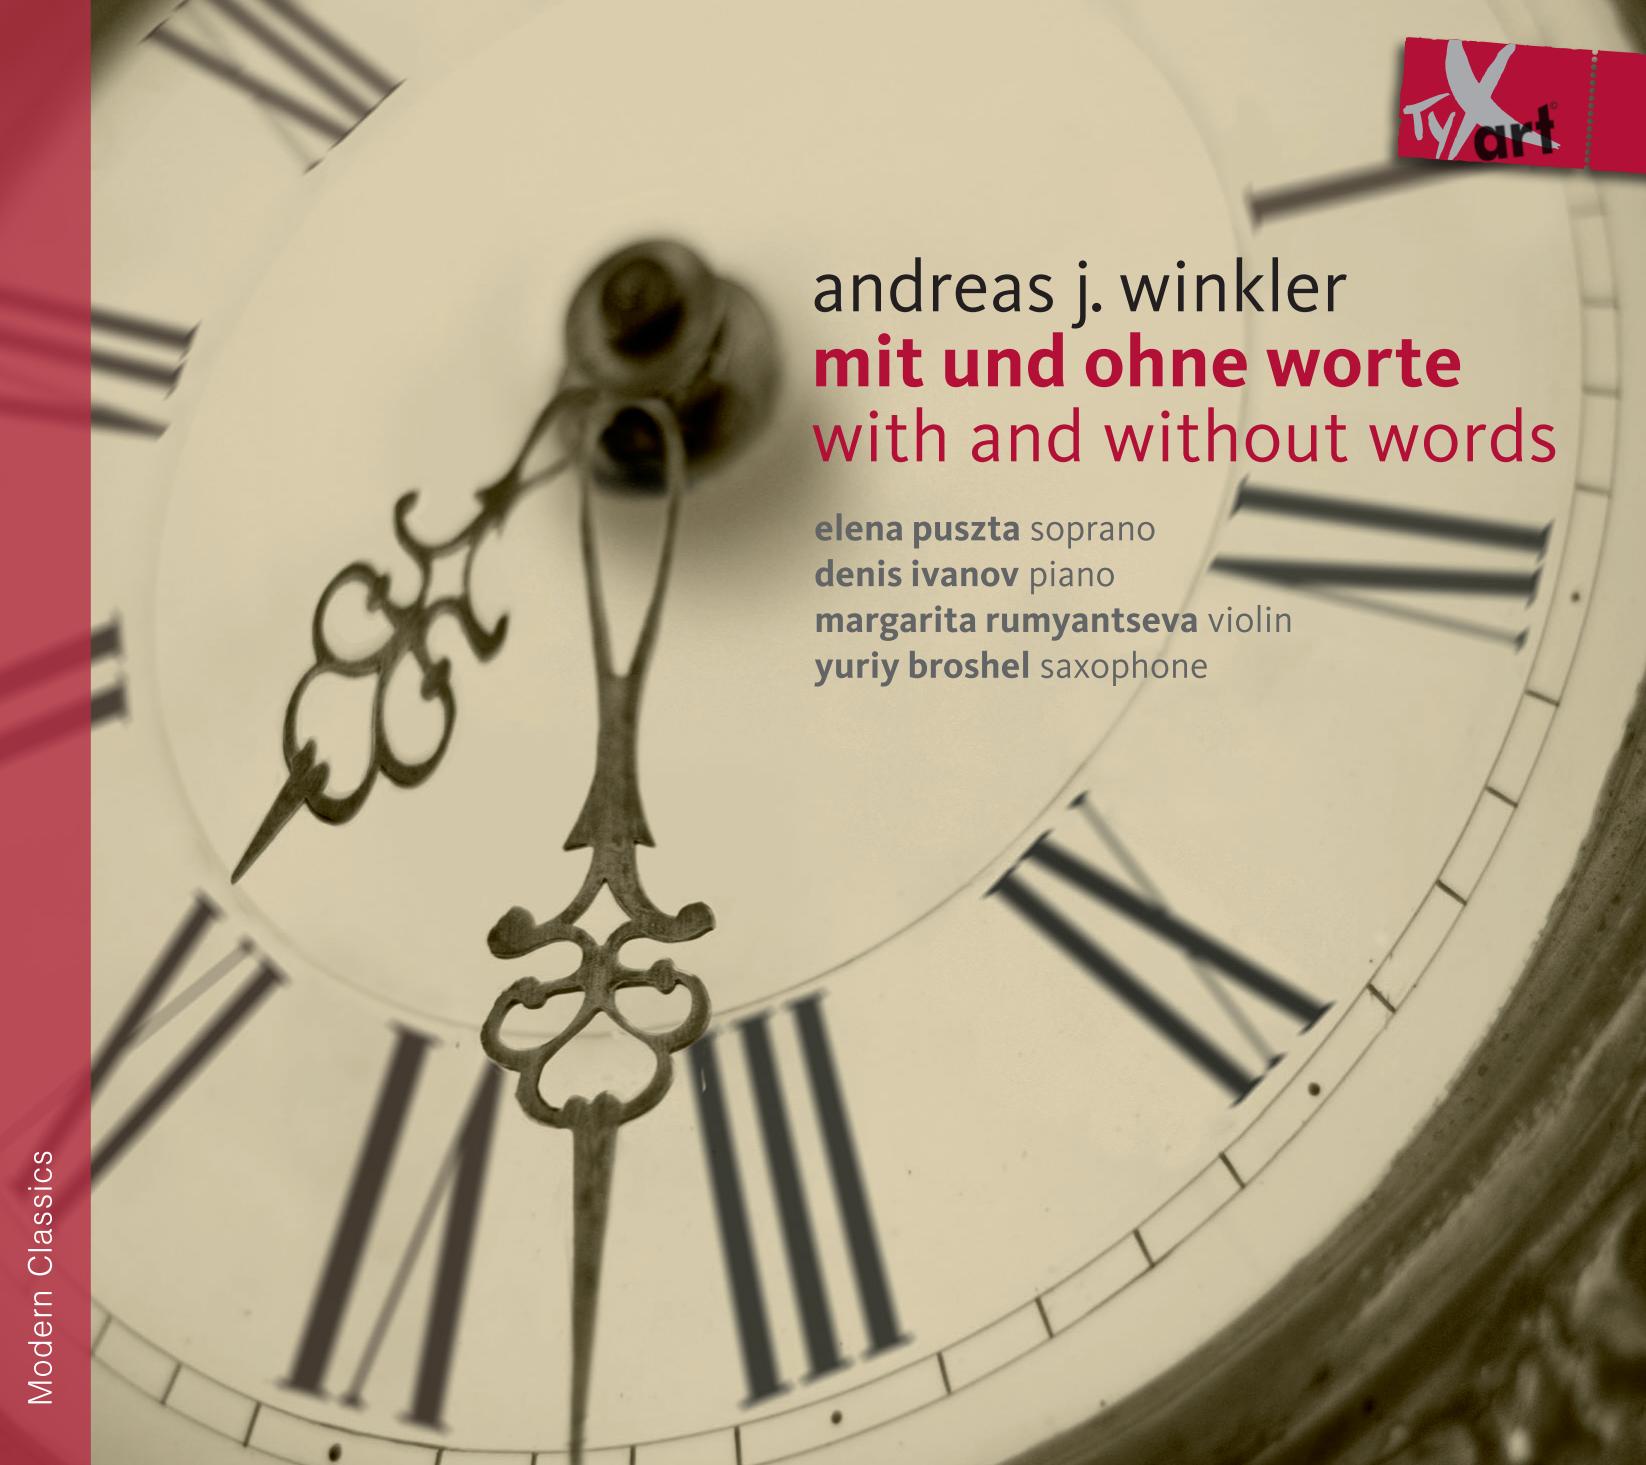 Andreas J. Winkler: with and without words - Chamber Music, Lieder and Works for Piano solo